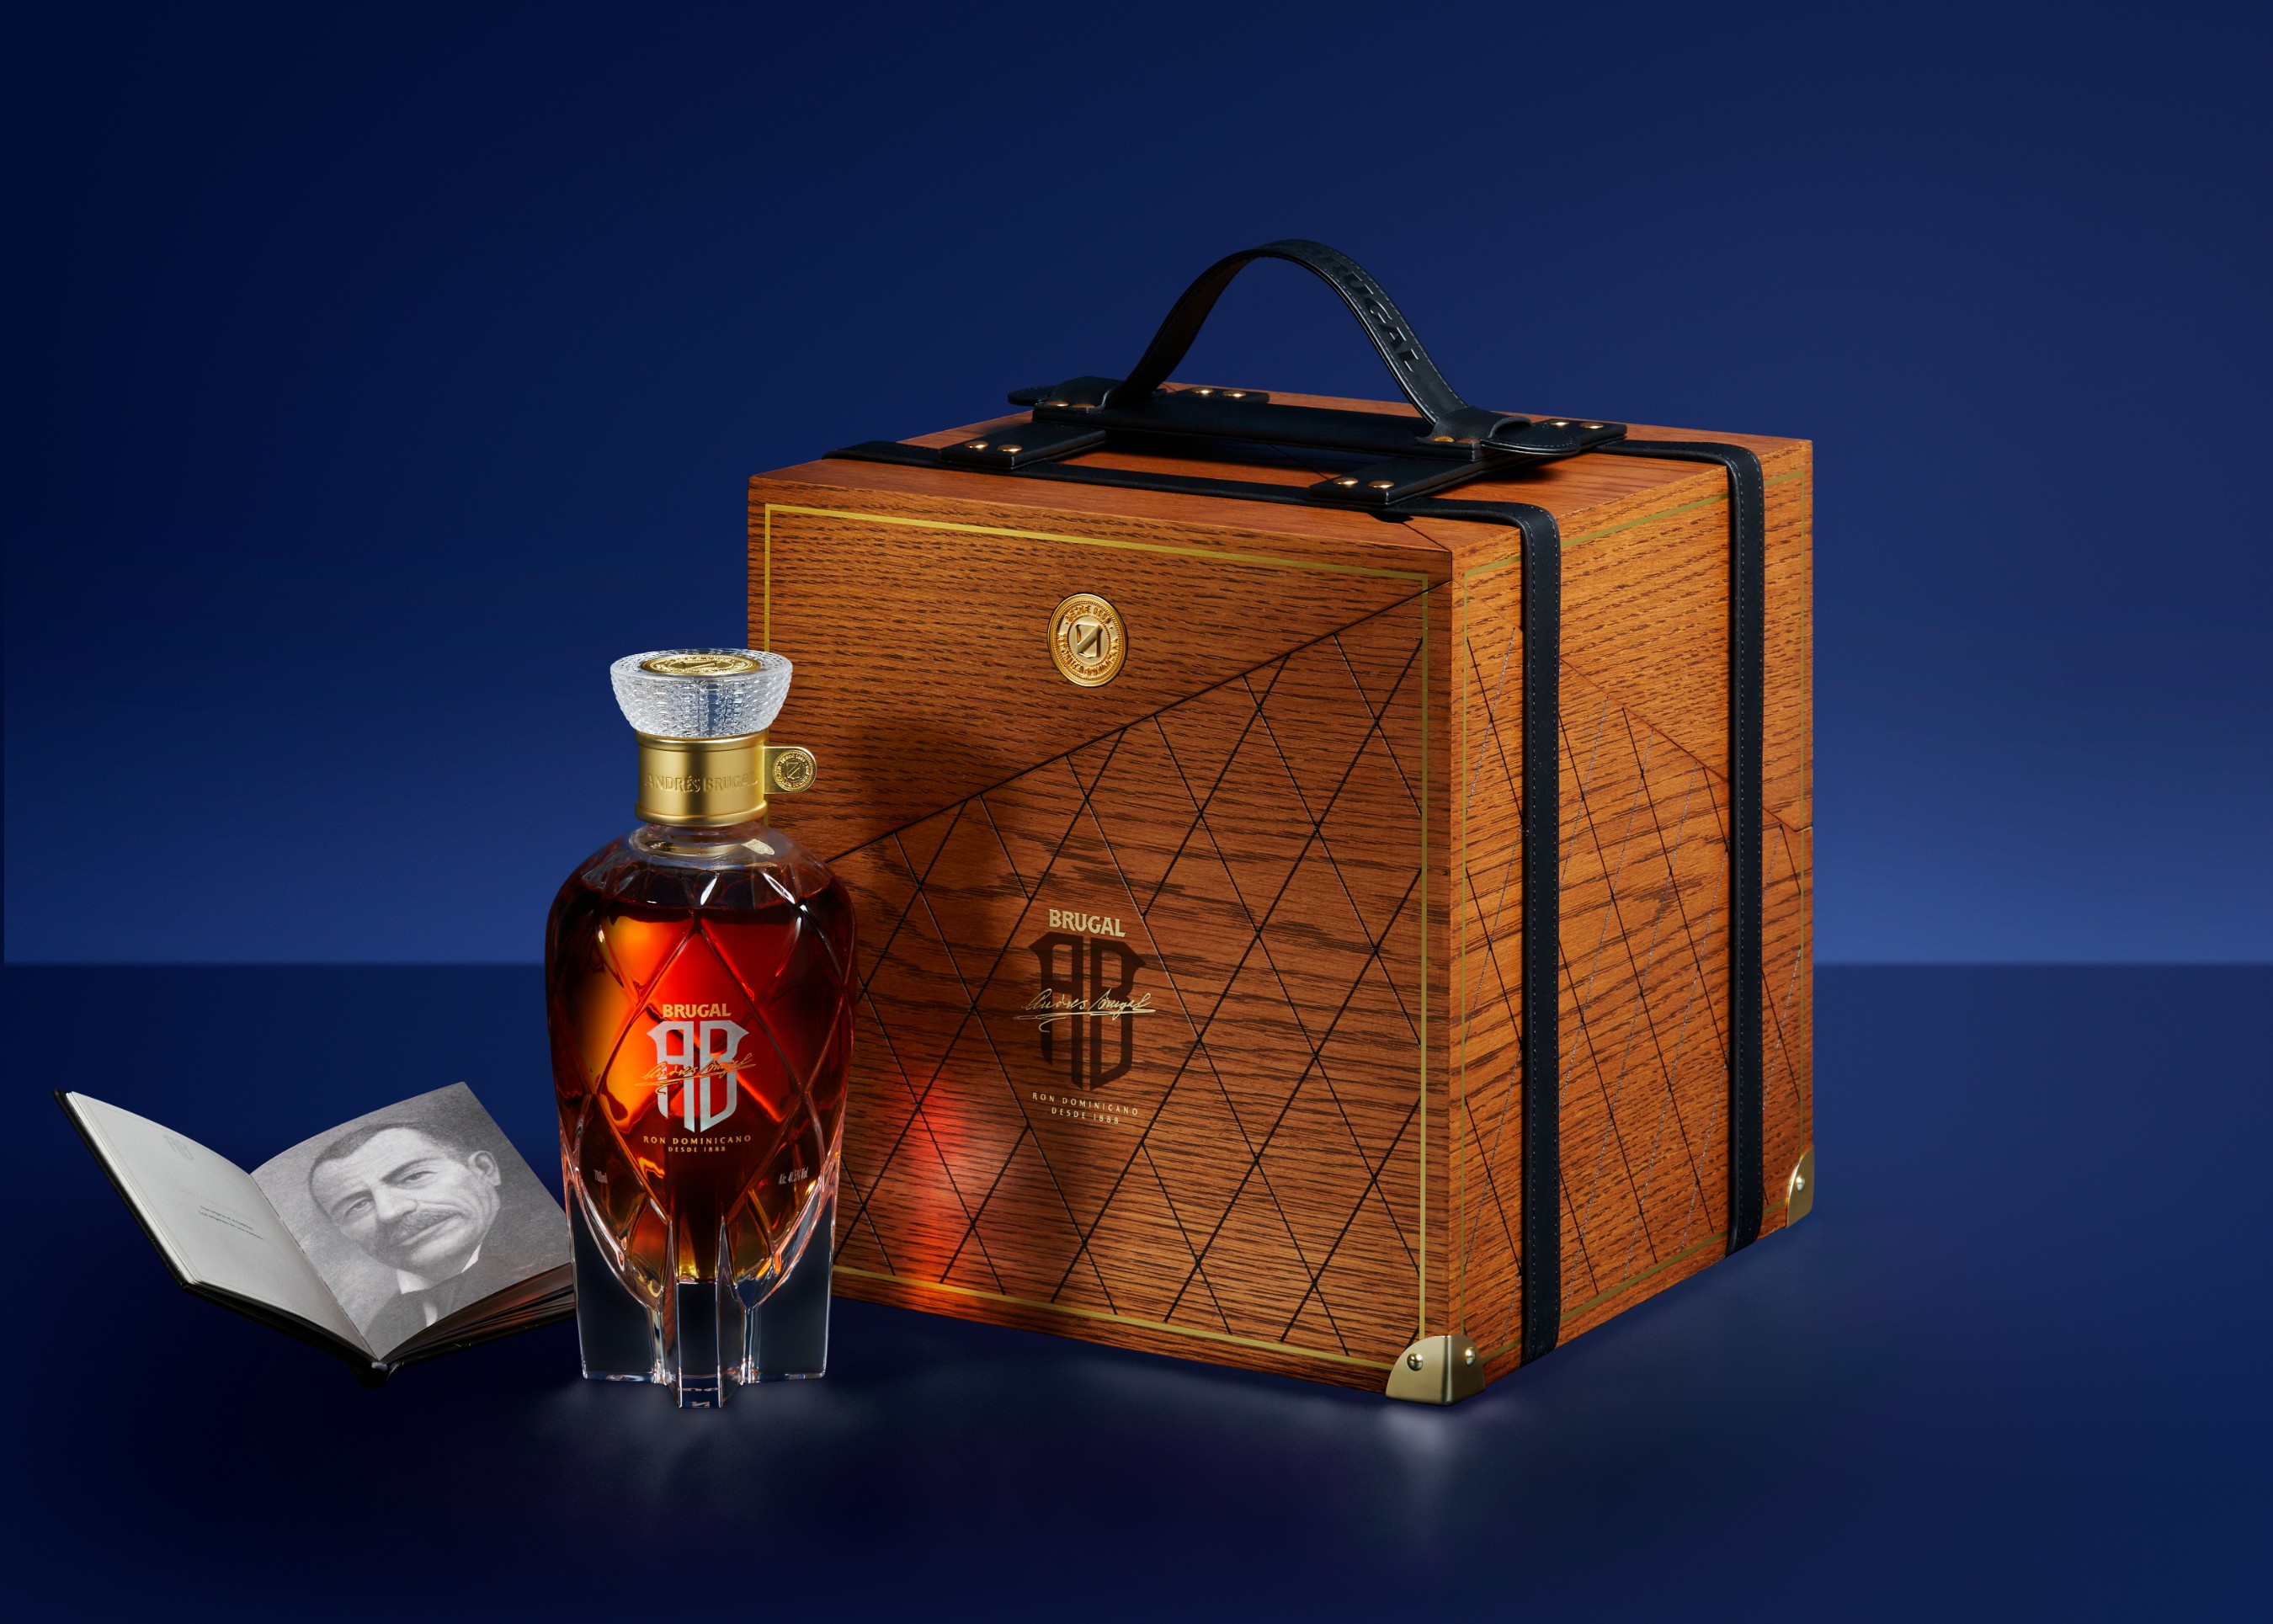 Andrés Brugal is bottled in a crystal decanter etched in a diamond pattern redolent of the brand’s iconic netting, and presented in a cabinet inspired by the traveling cases earlier Maestros used.